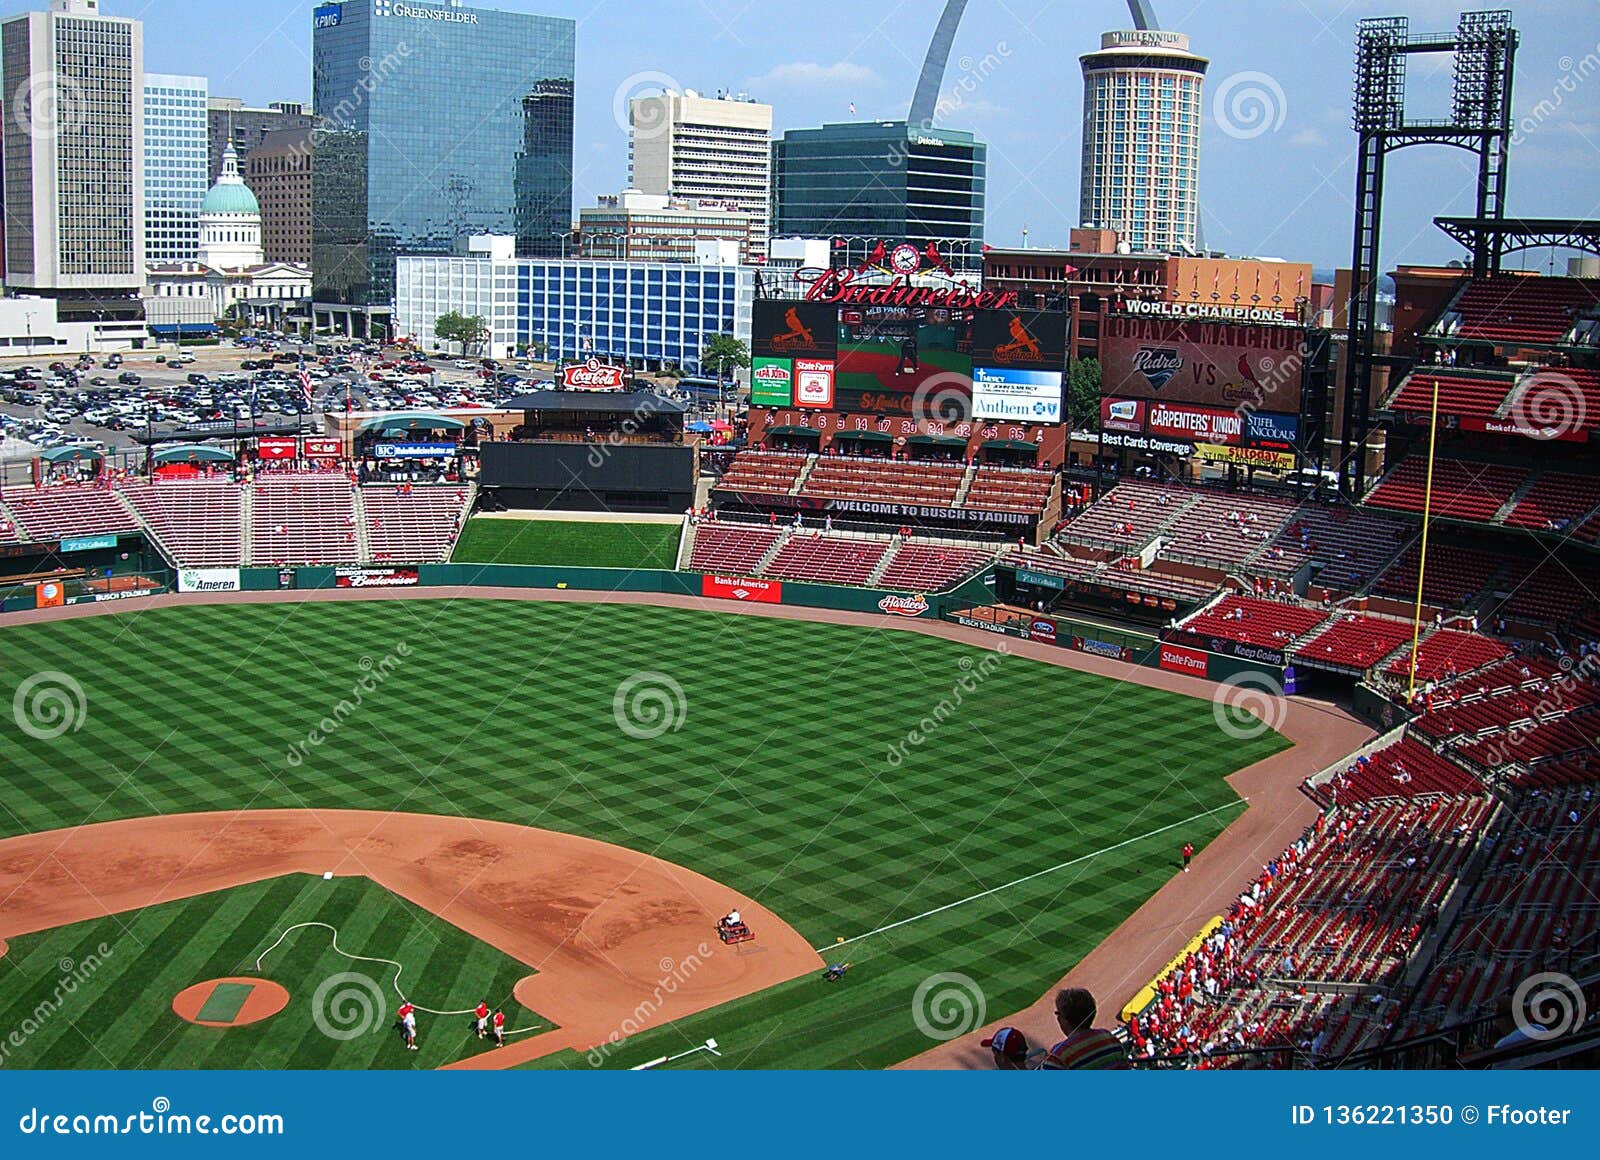 Busch Stadium - St. Louis Cardinals Editorial Image - Image of downtown, attractions: 136221350